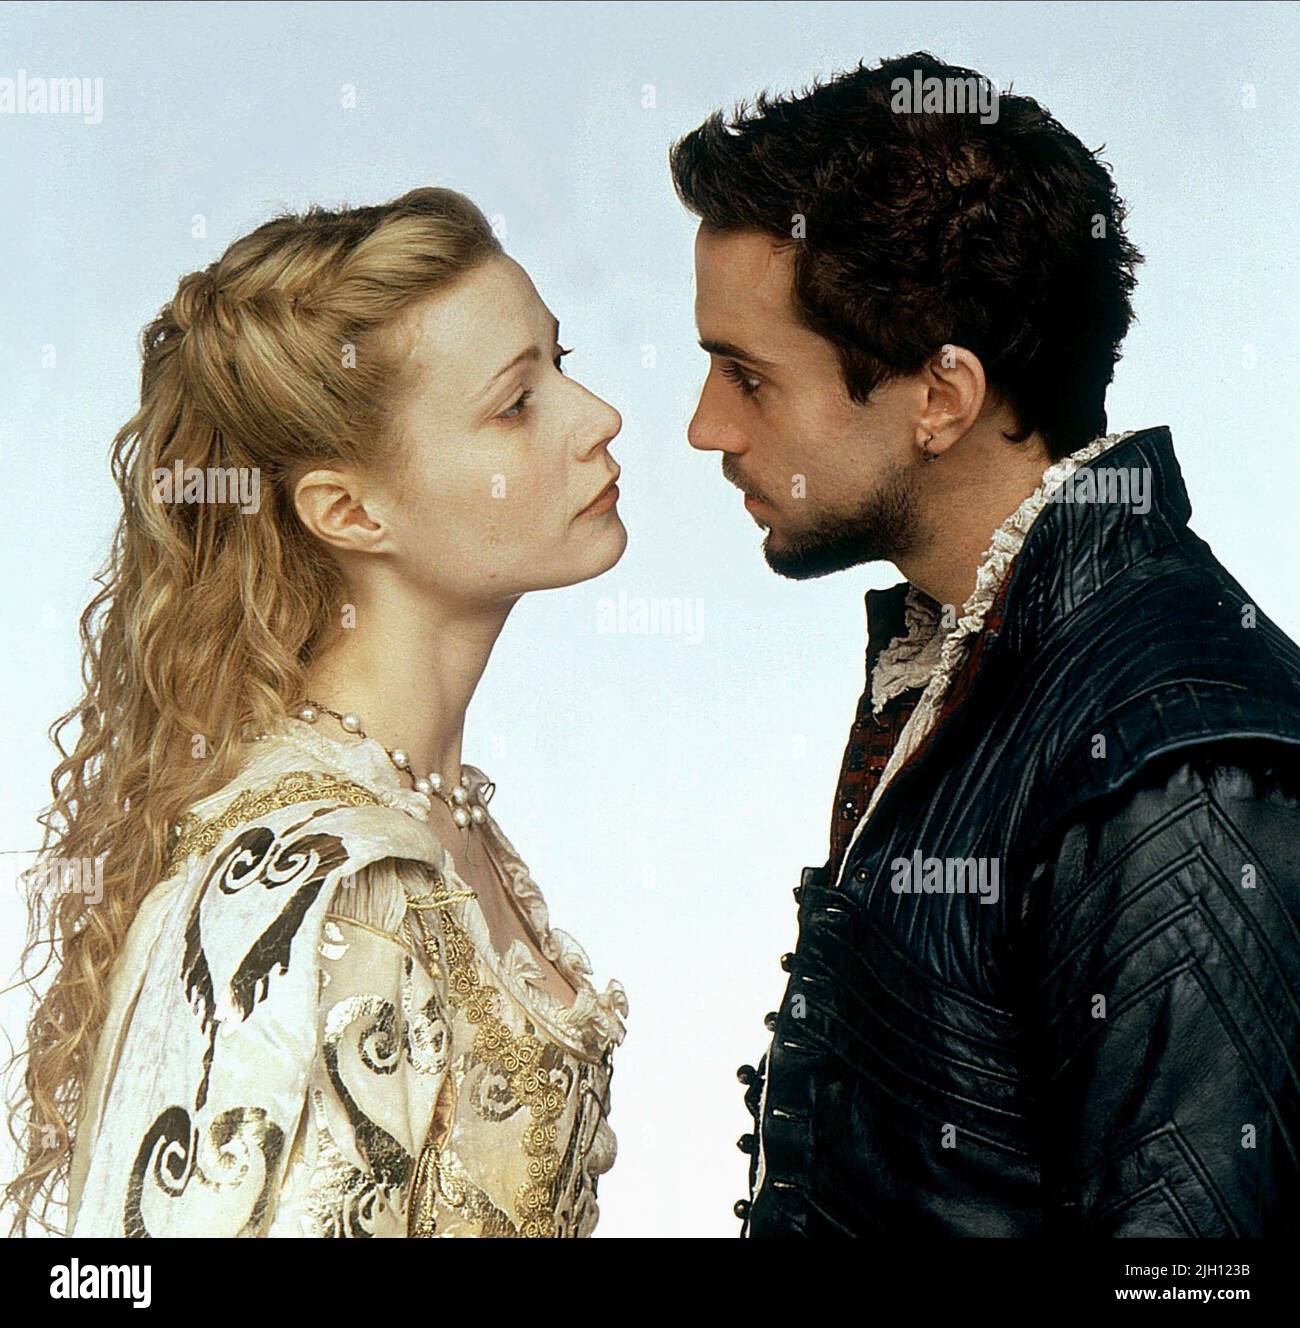 PALTROW,FIENNES, Shakespeare in amore, 1998 Foto Stock